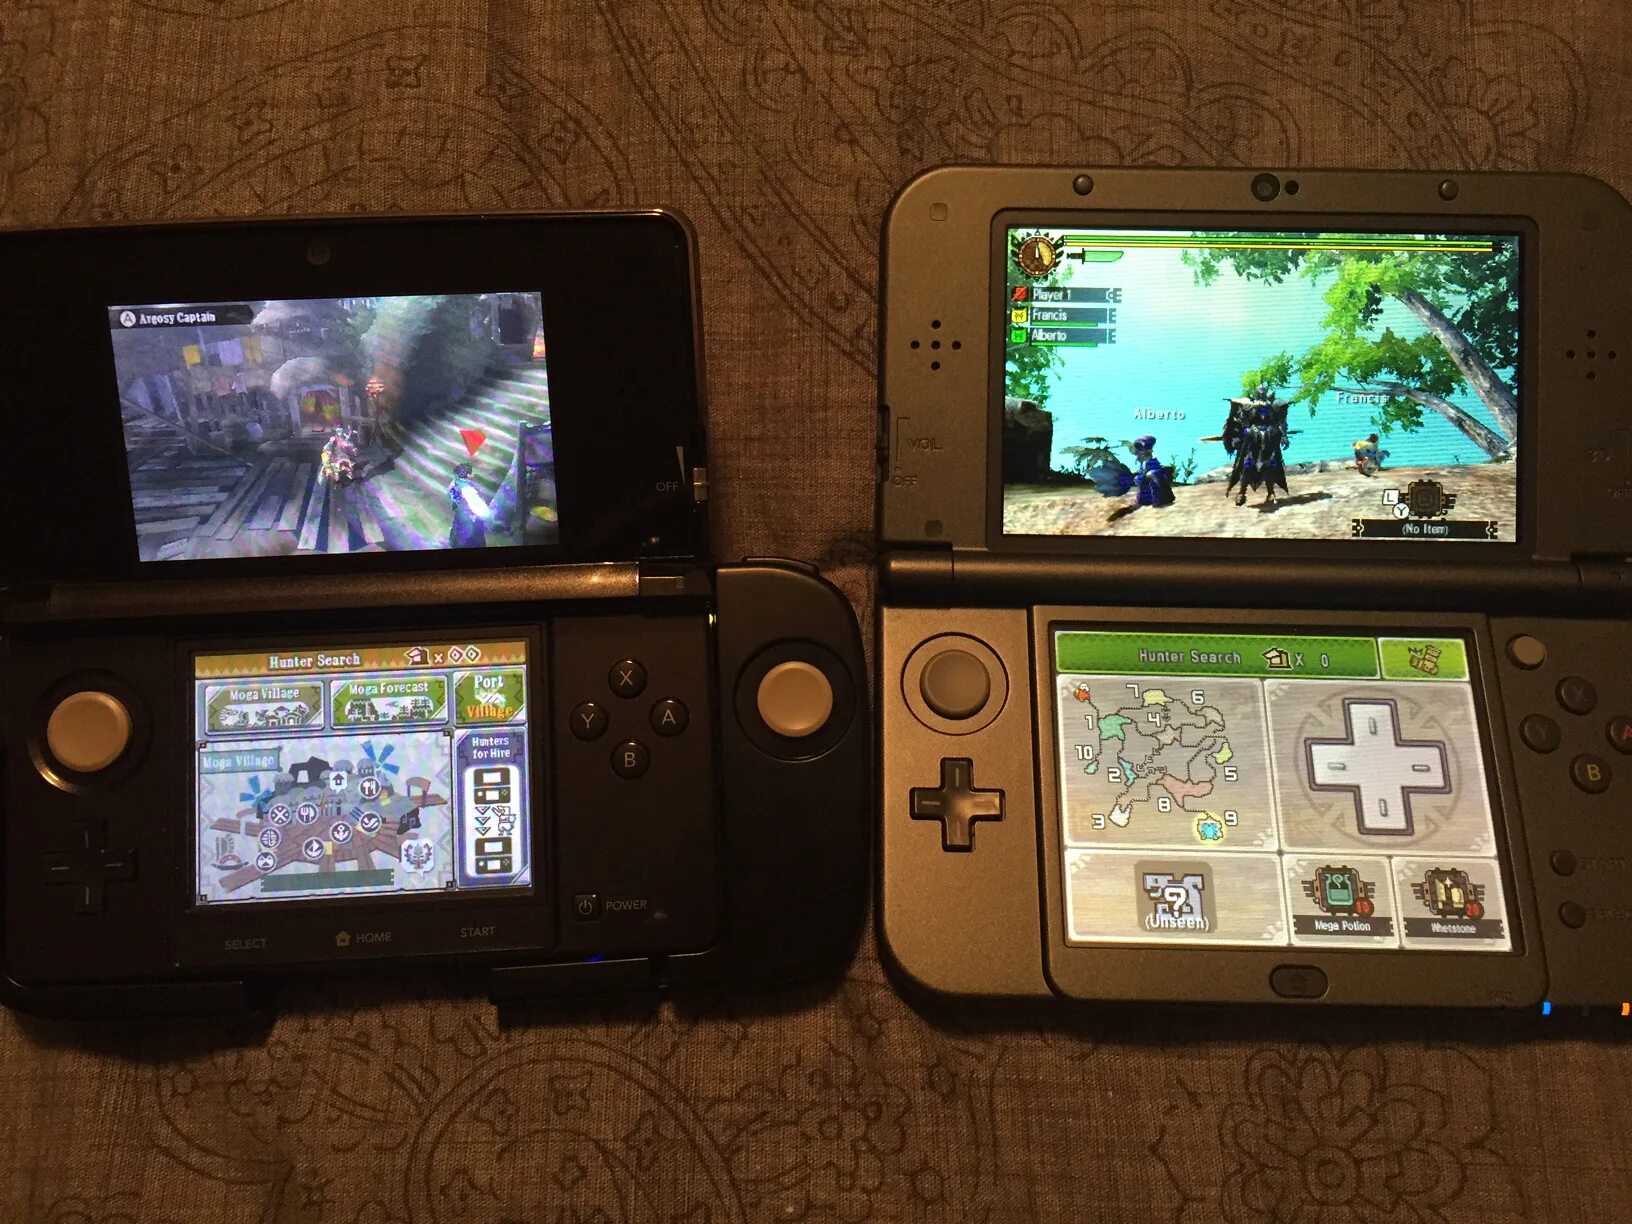 Nintendo 3ds XL. Nintendo 2ds old. Nintendo 3ds Олд. Old Nintendo 3ds XL Decays.